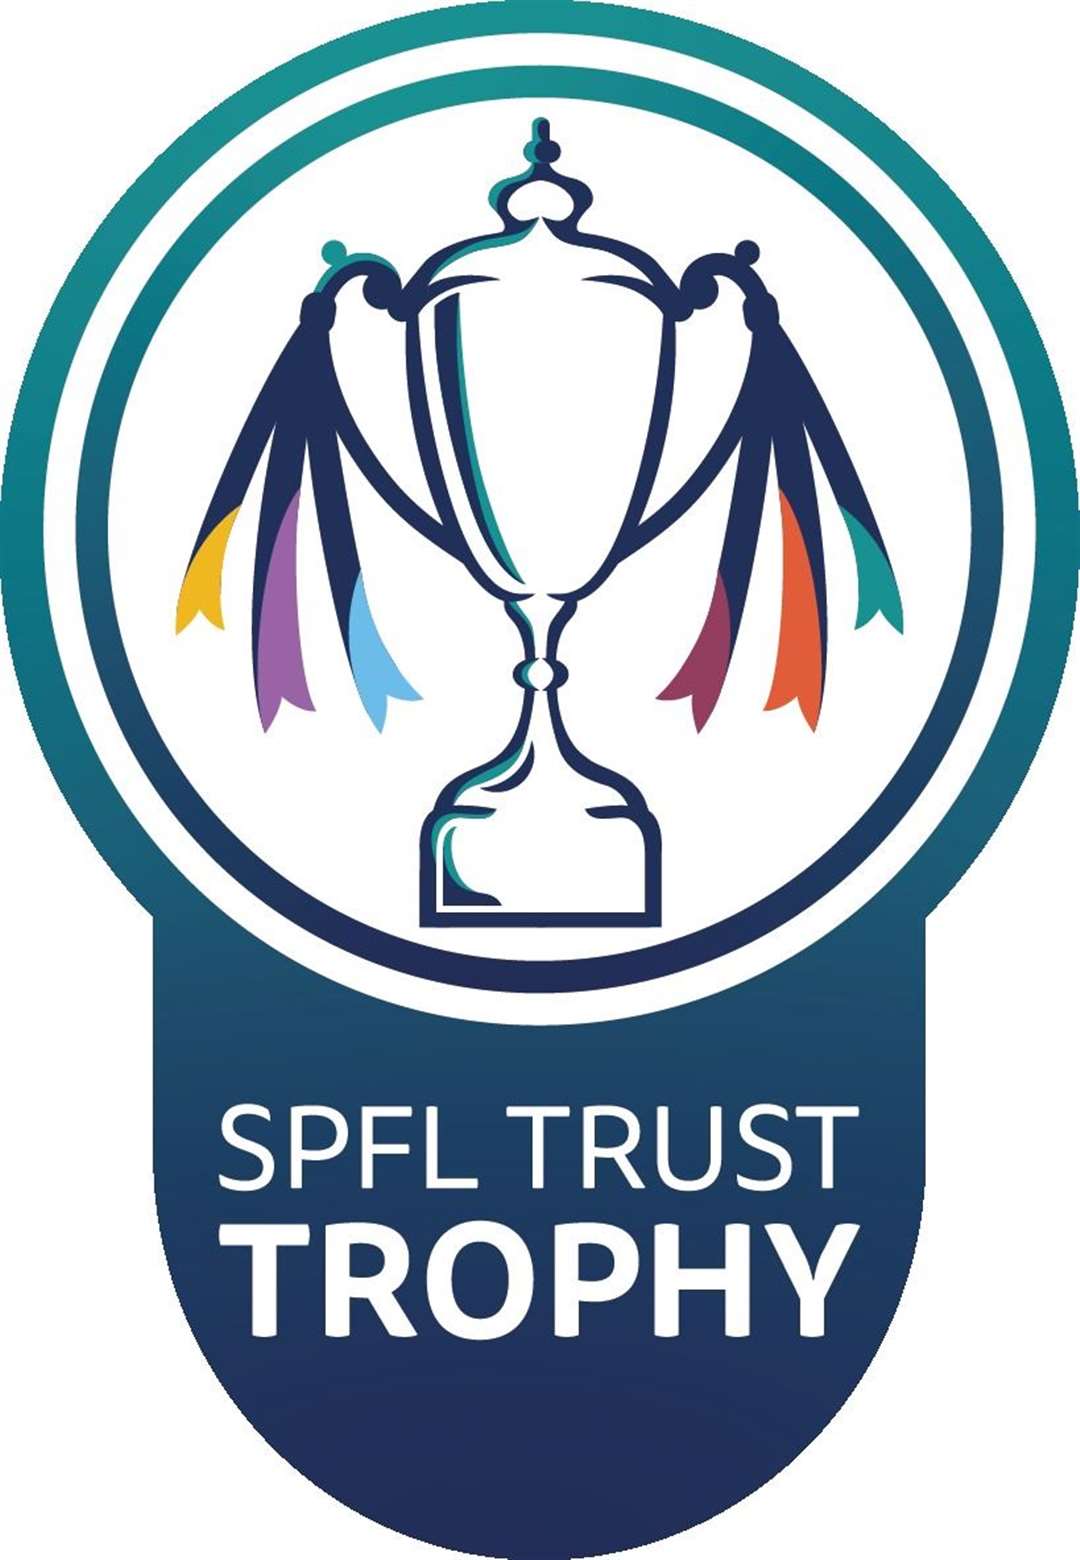 The Challenge Cup is now the SPFL Trust Trophy.